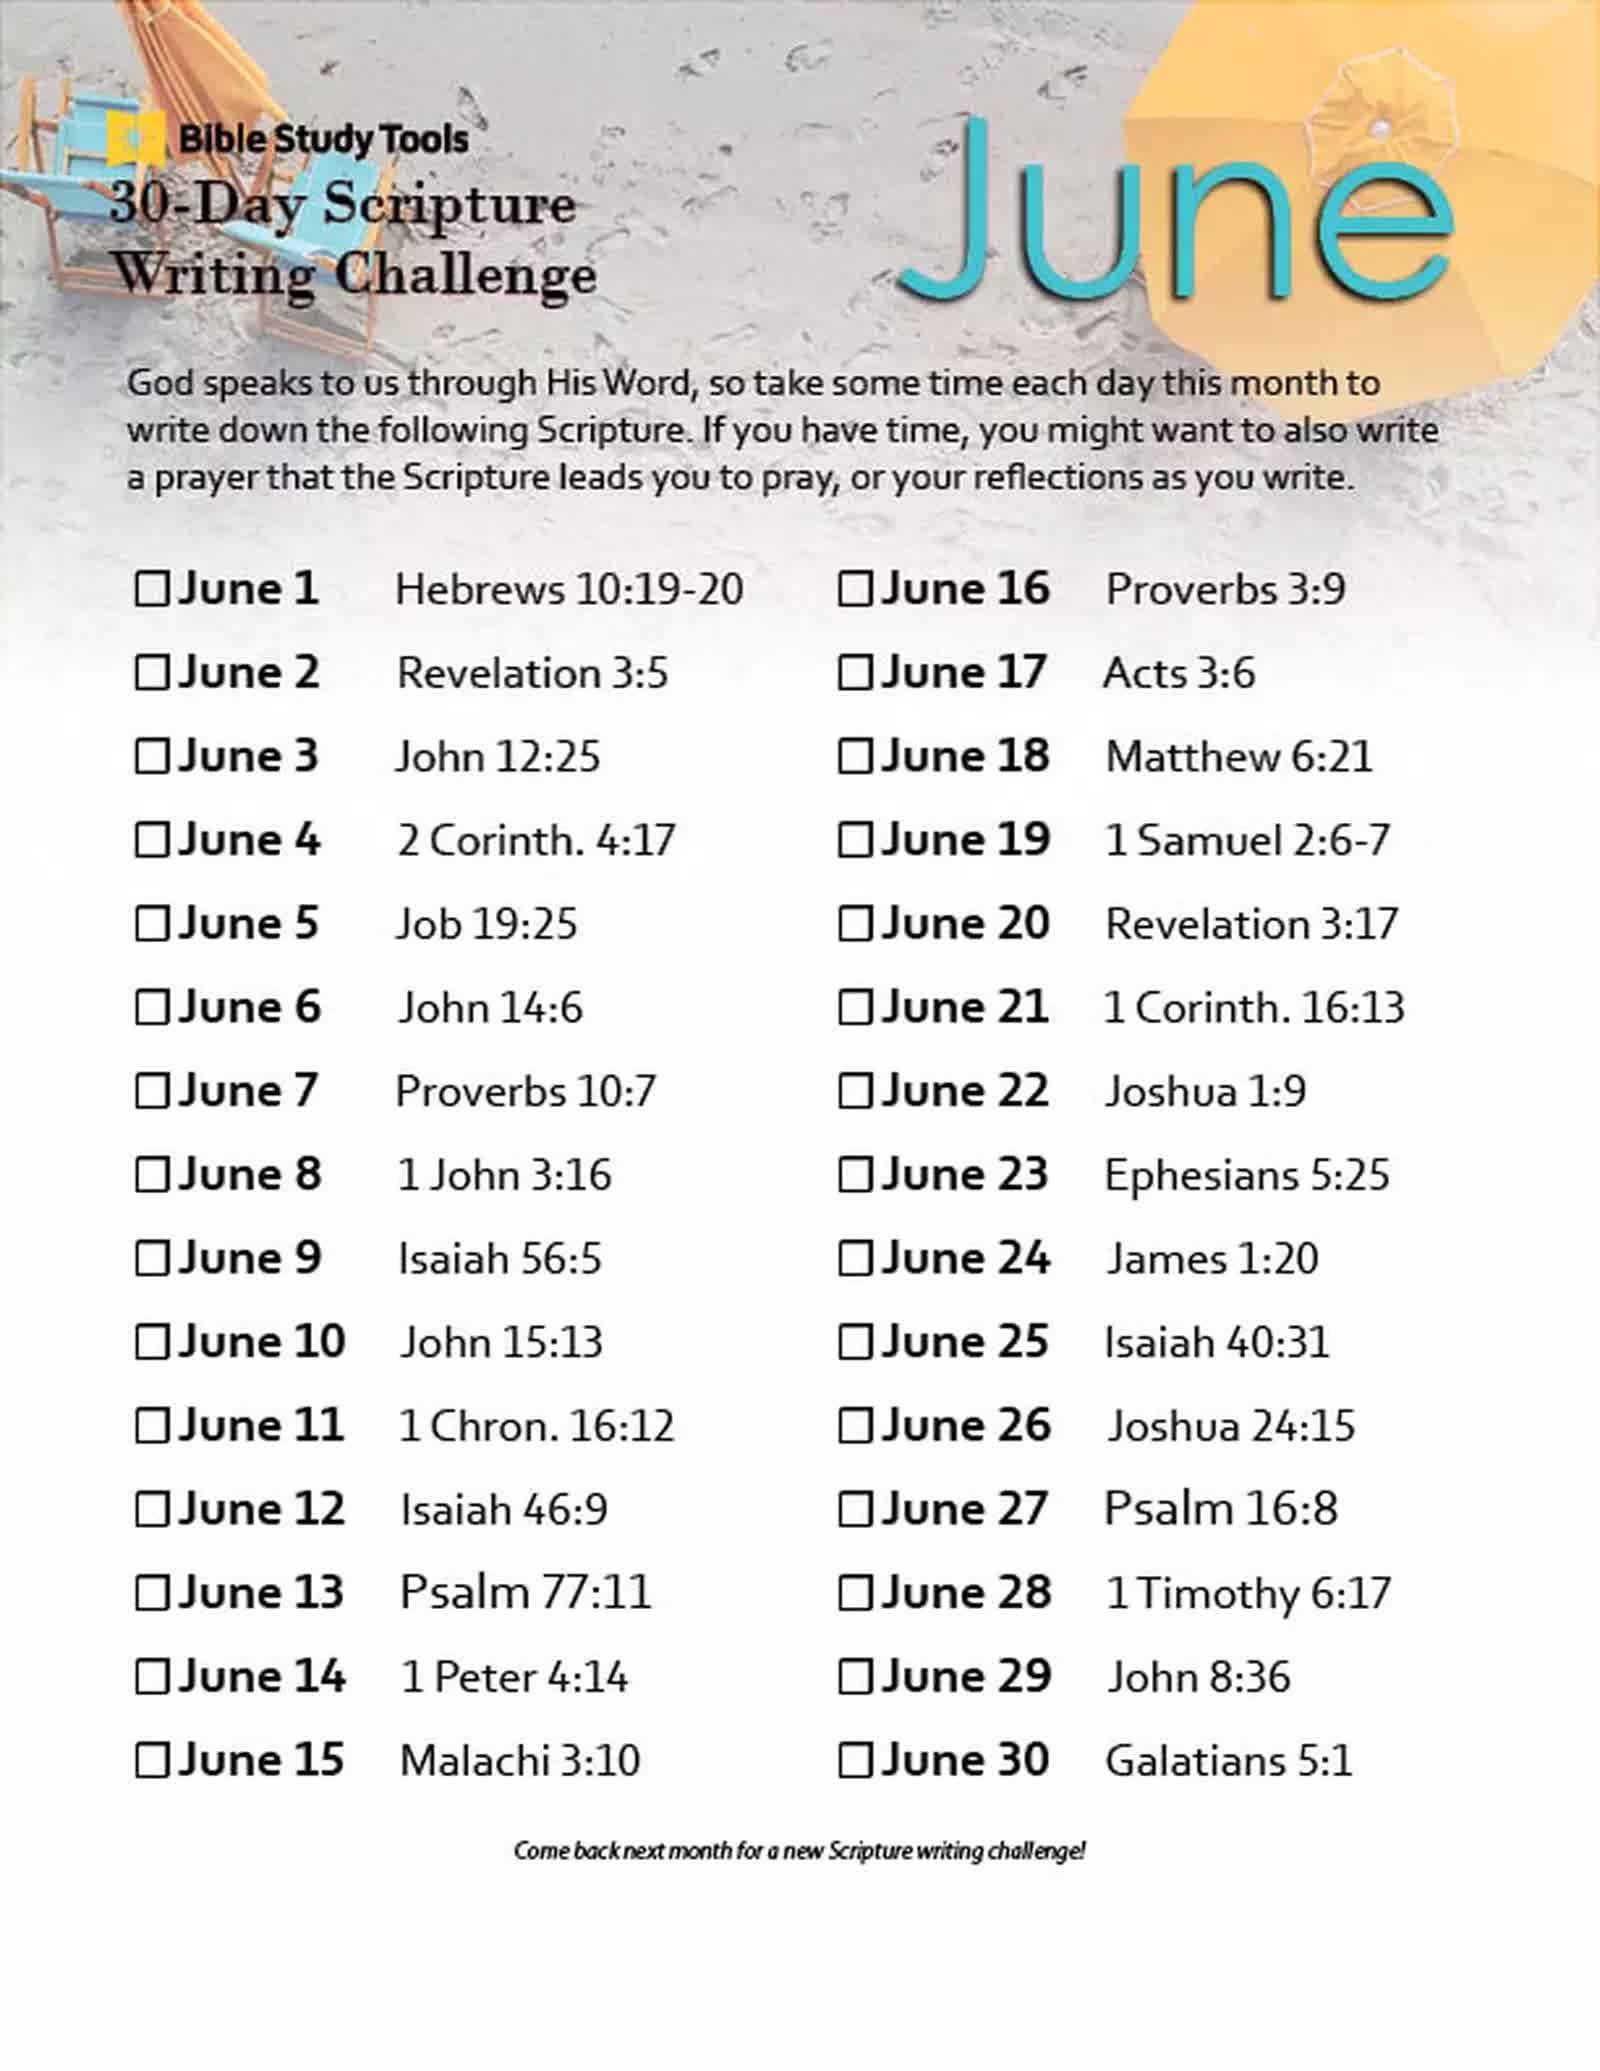 June's 30Day Scripture Writing Challenge Bible Study Tips